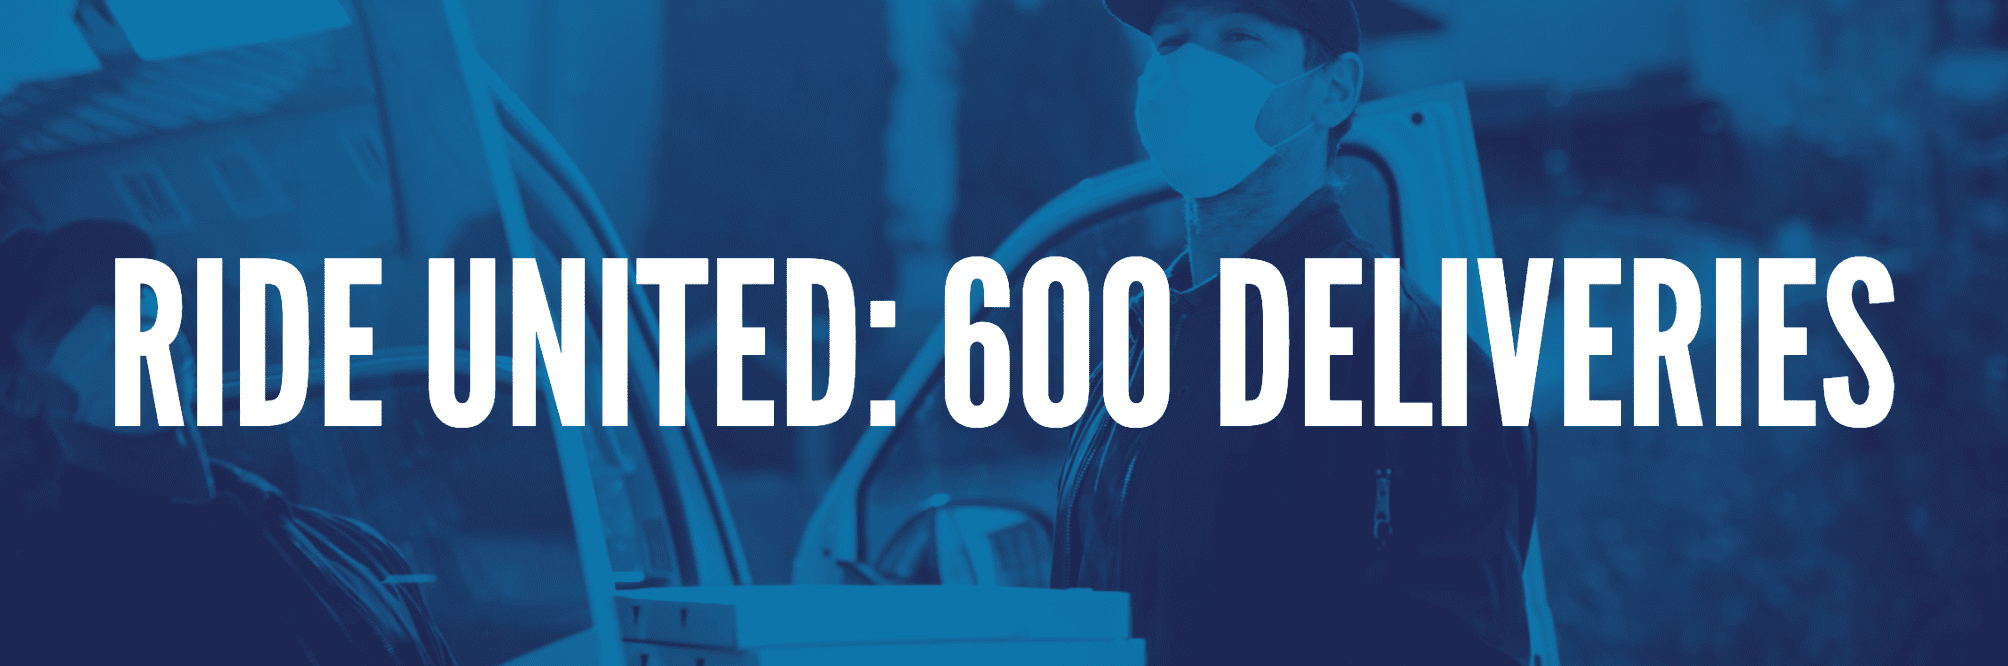 Ride United: 600 Deliveries